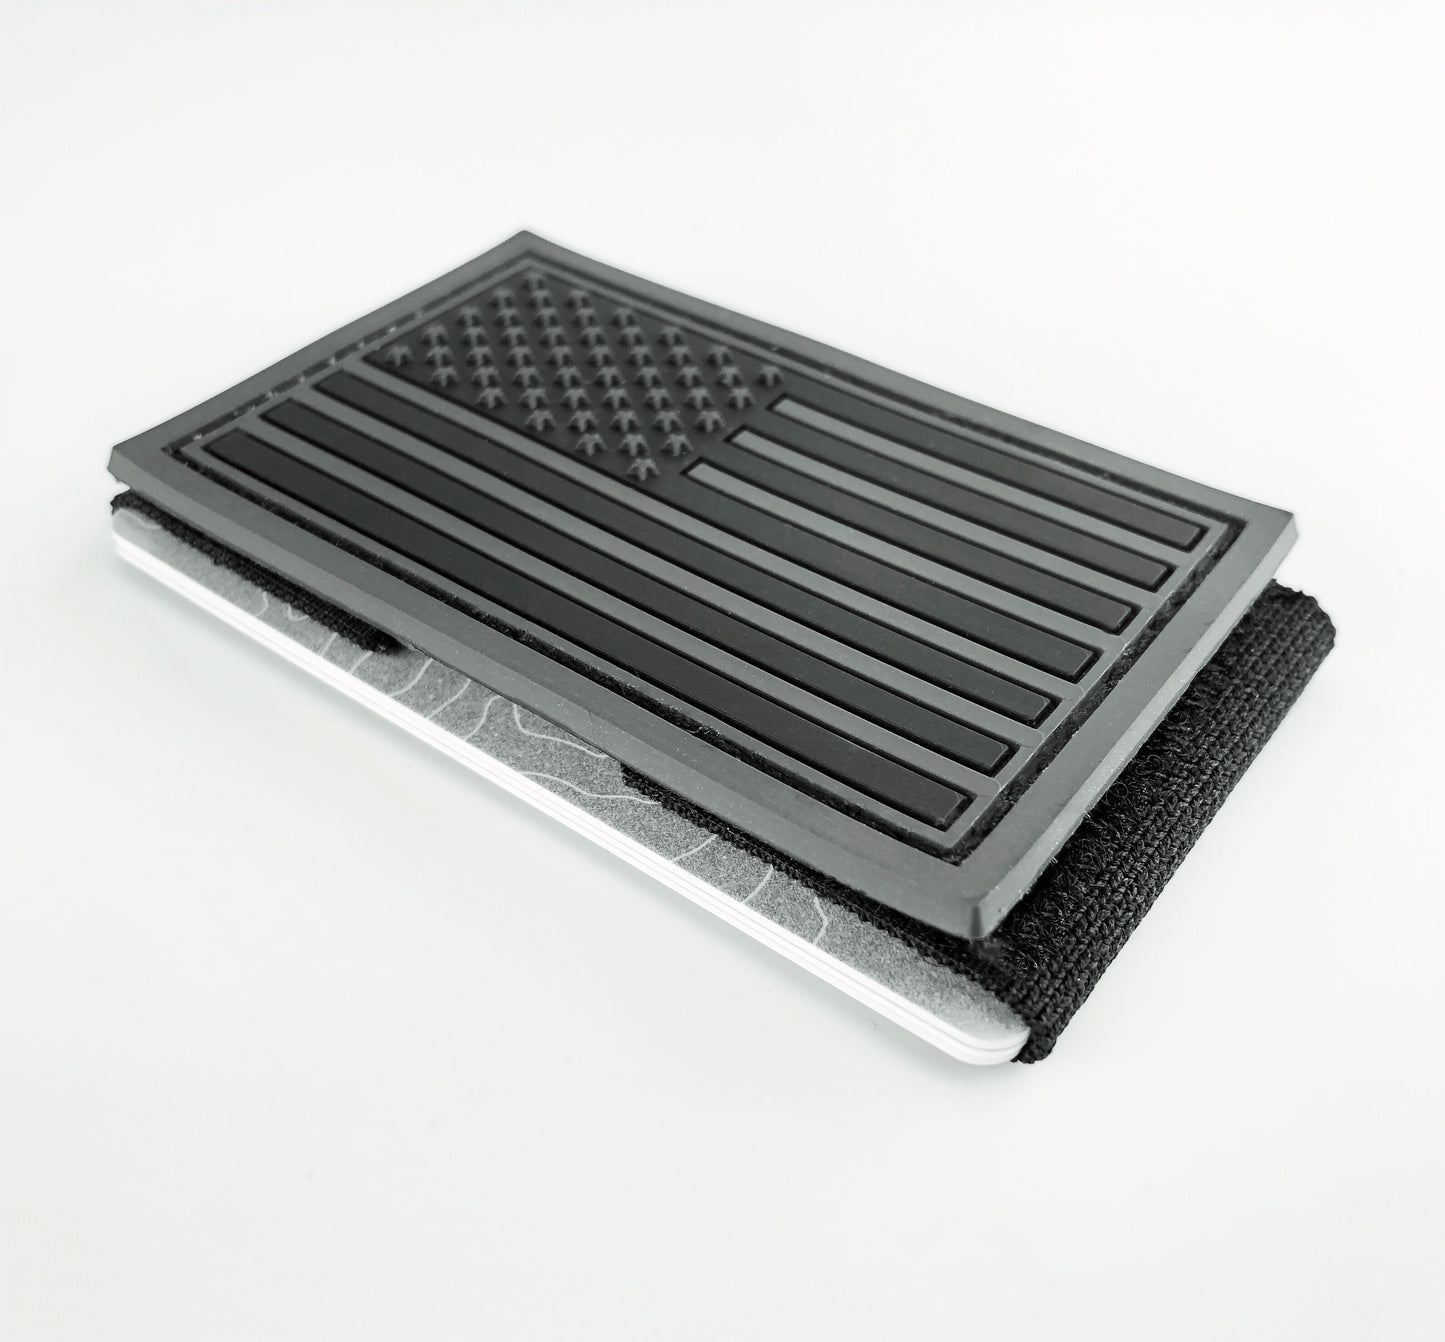 Removable Velcro Patch Panel (US Flag Patch Not Included sorry) –  Anti-Gear Co.